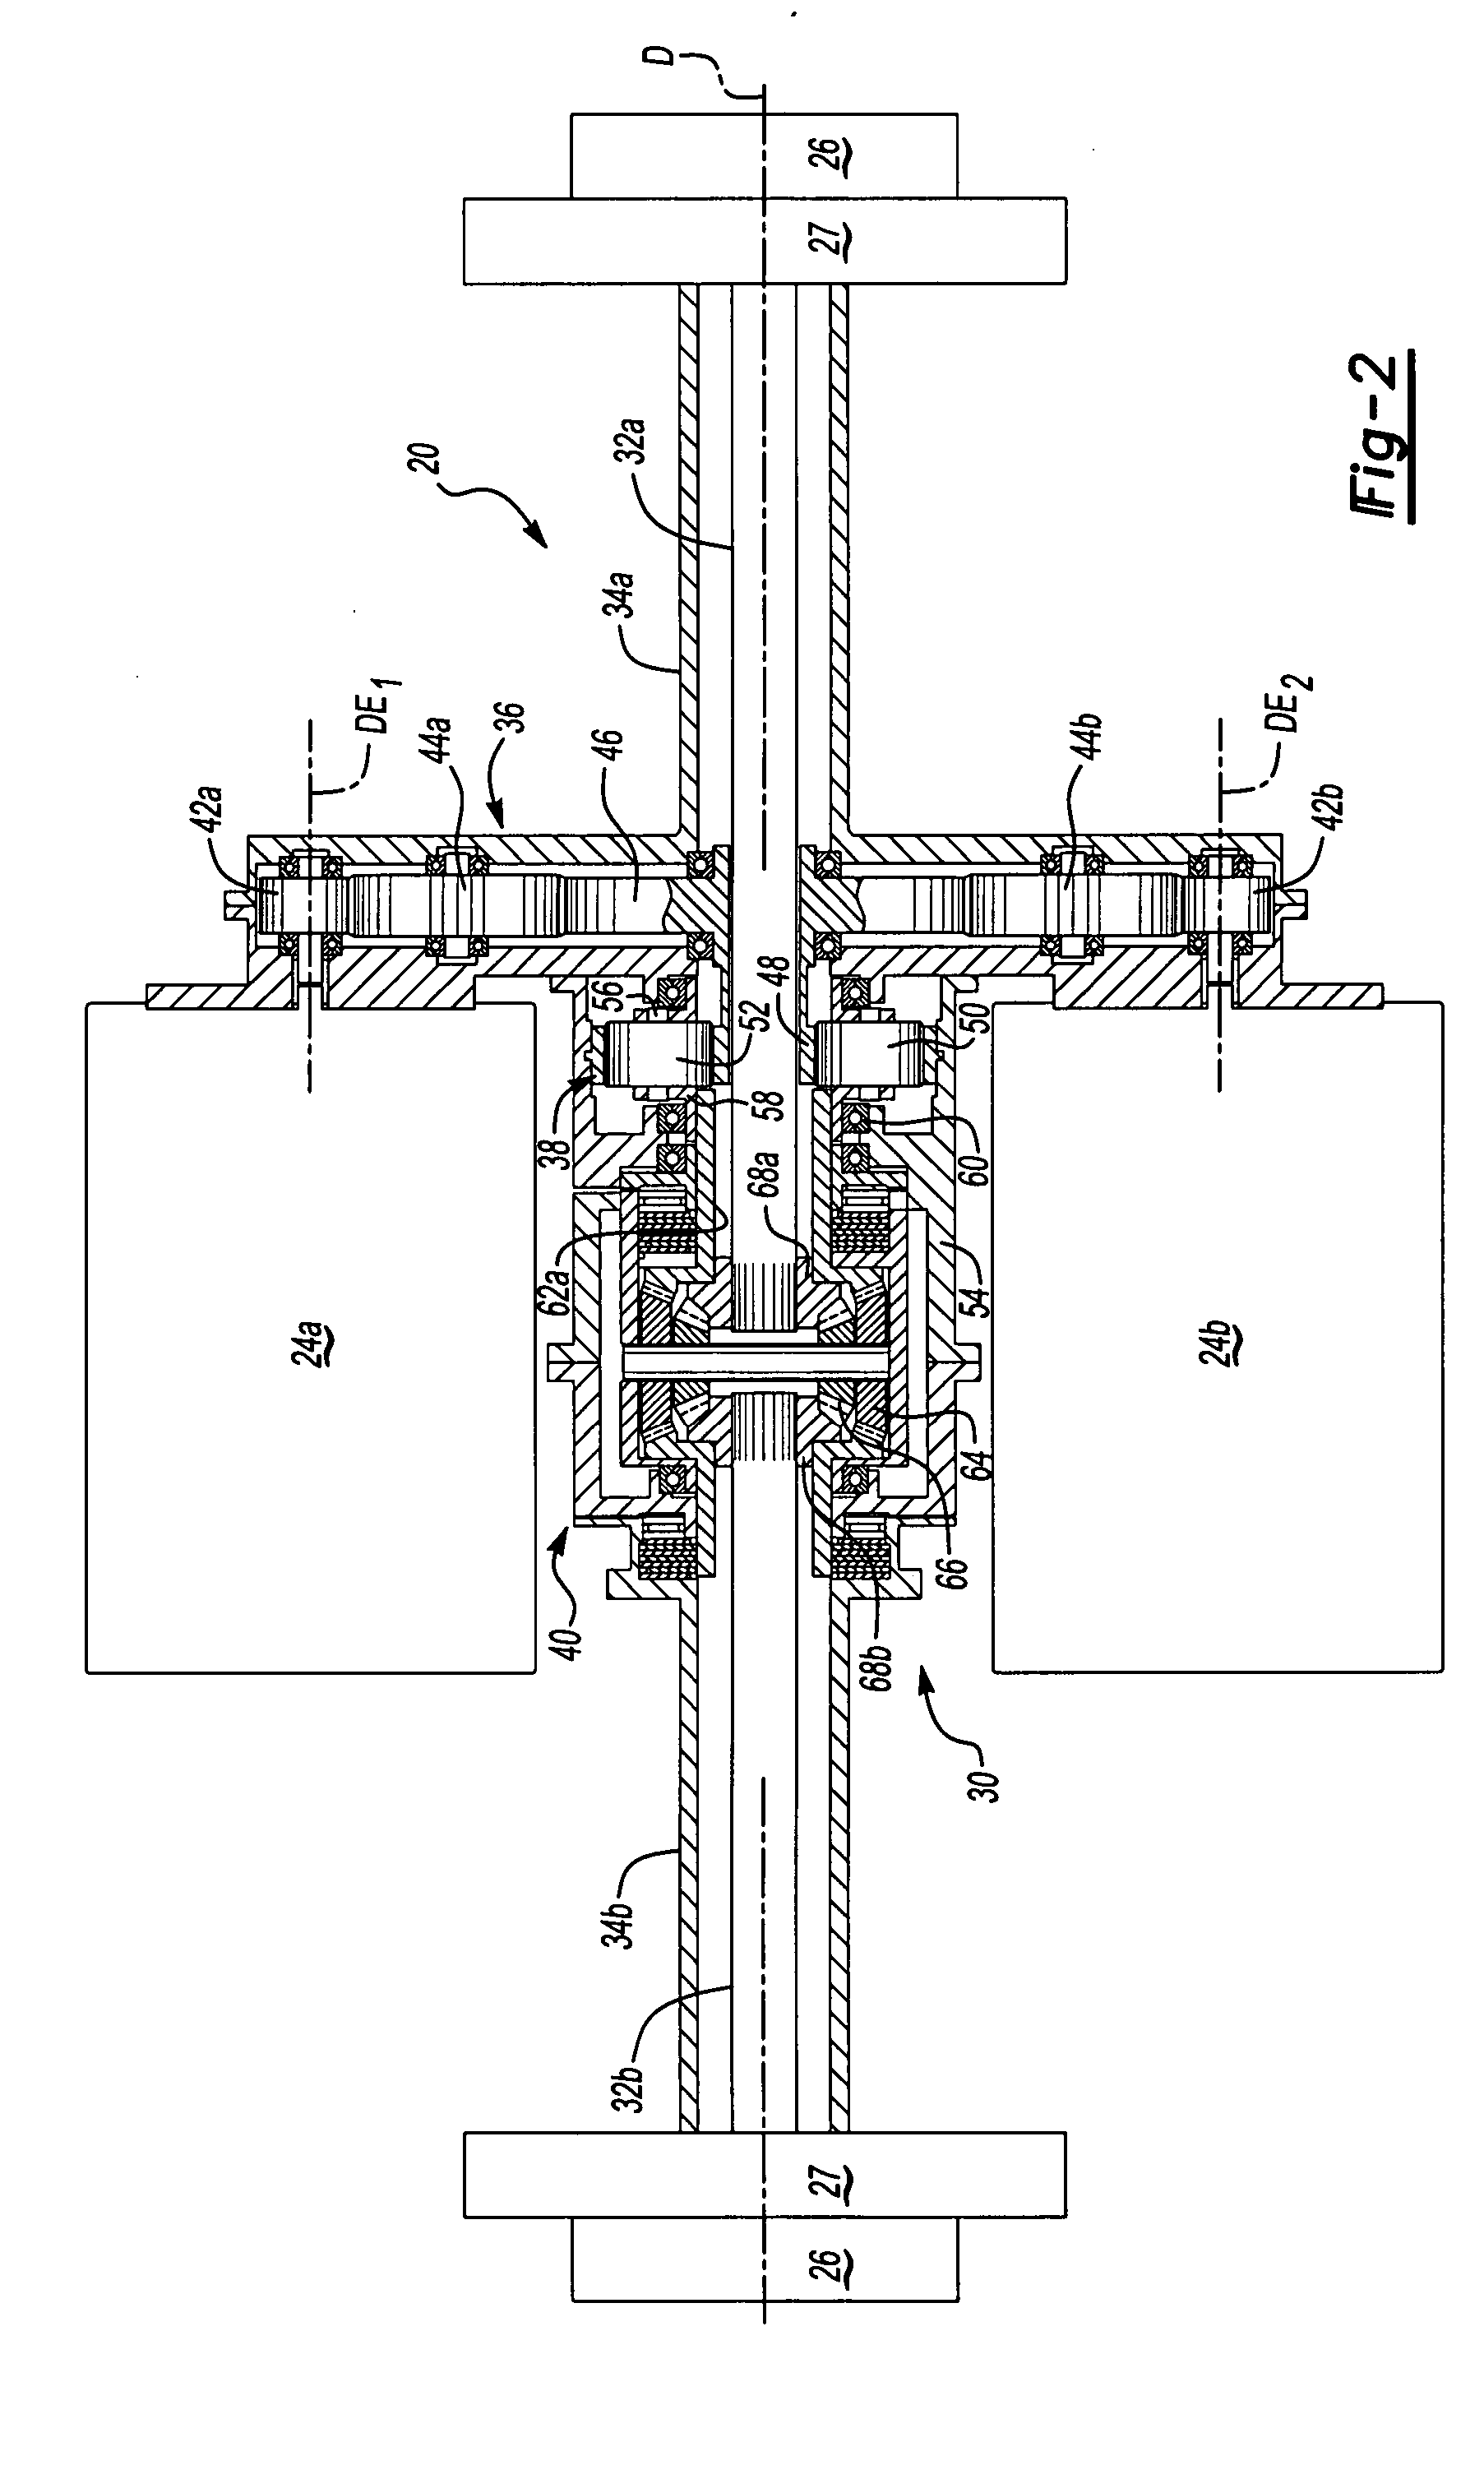 Axle assembly with parallel mounted electric motors